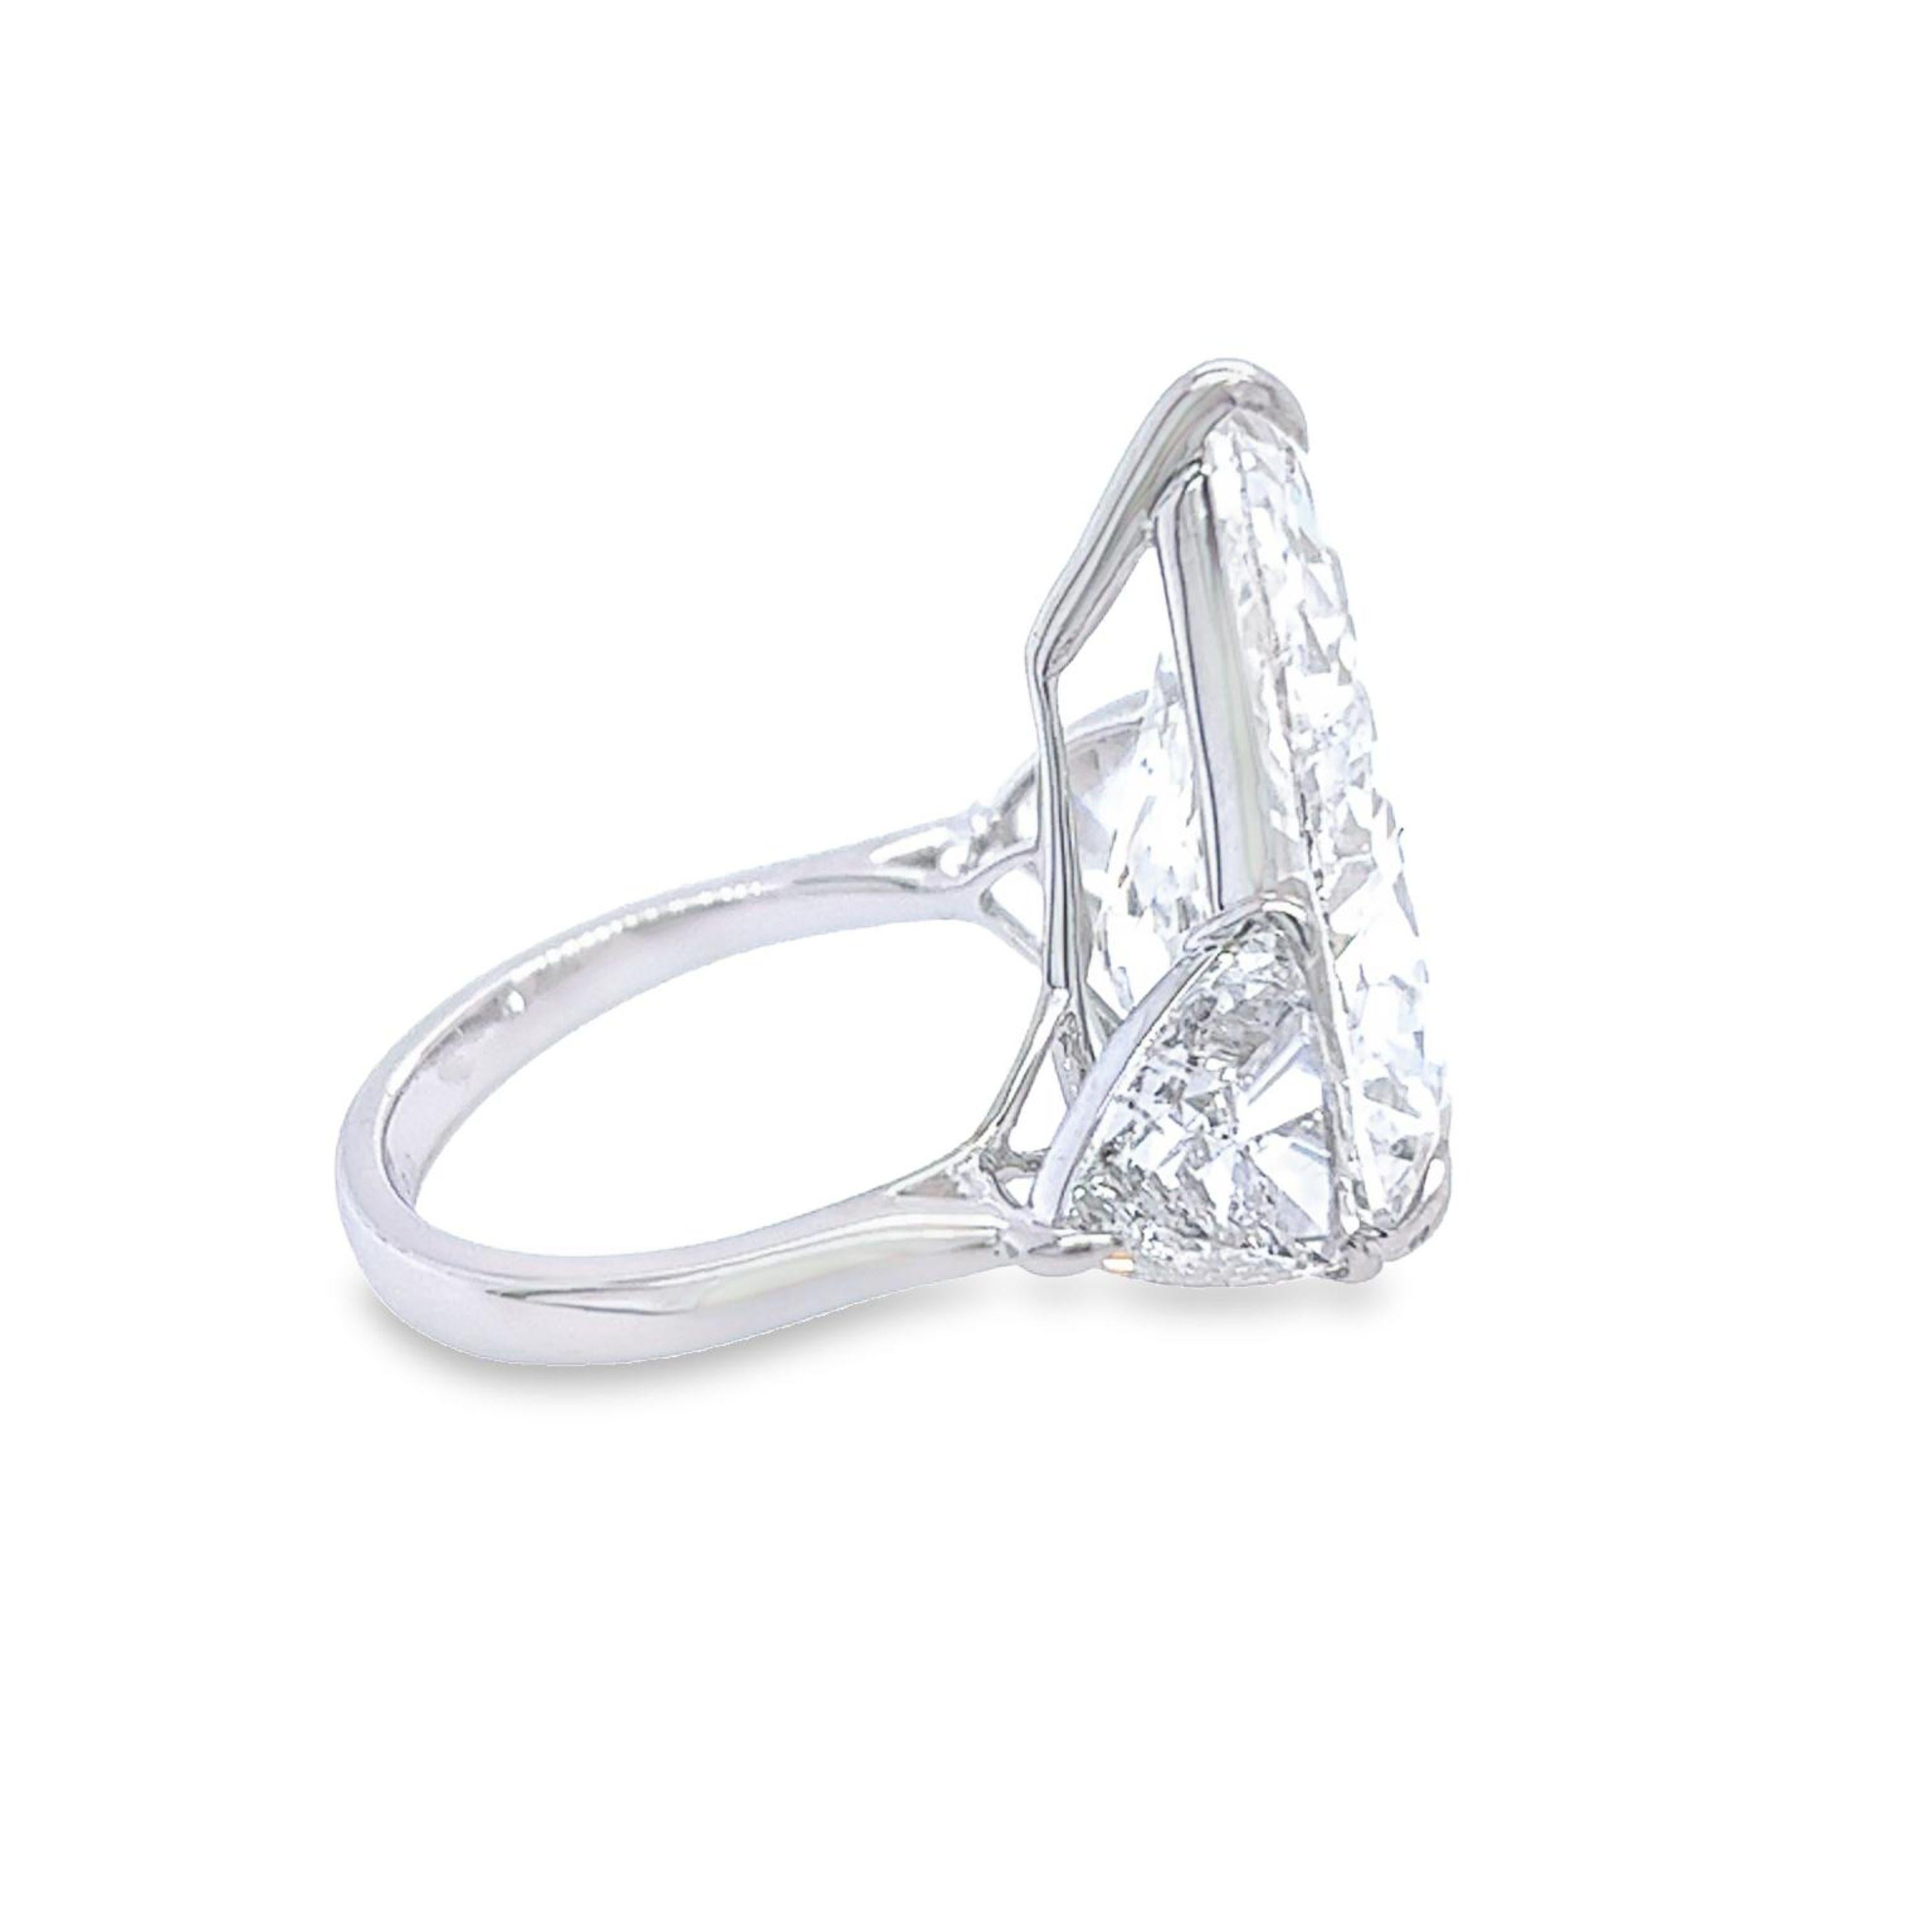 3ct pear shaped engagement ring